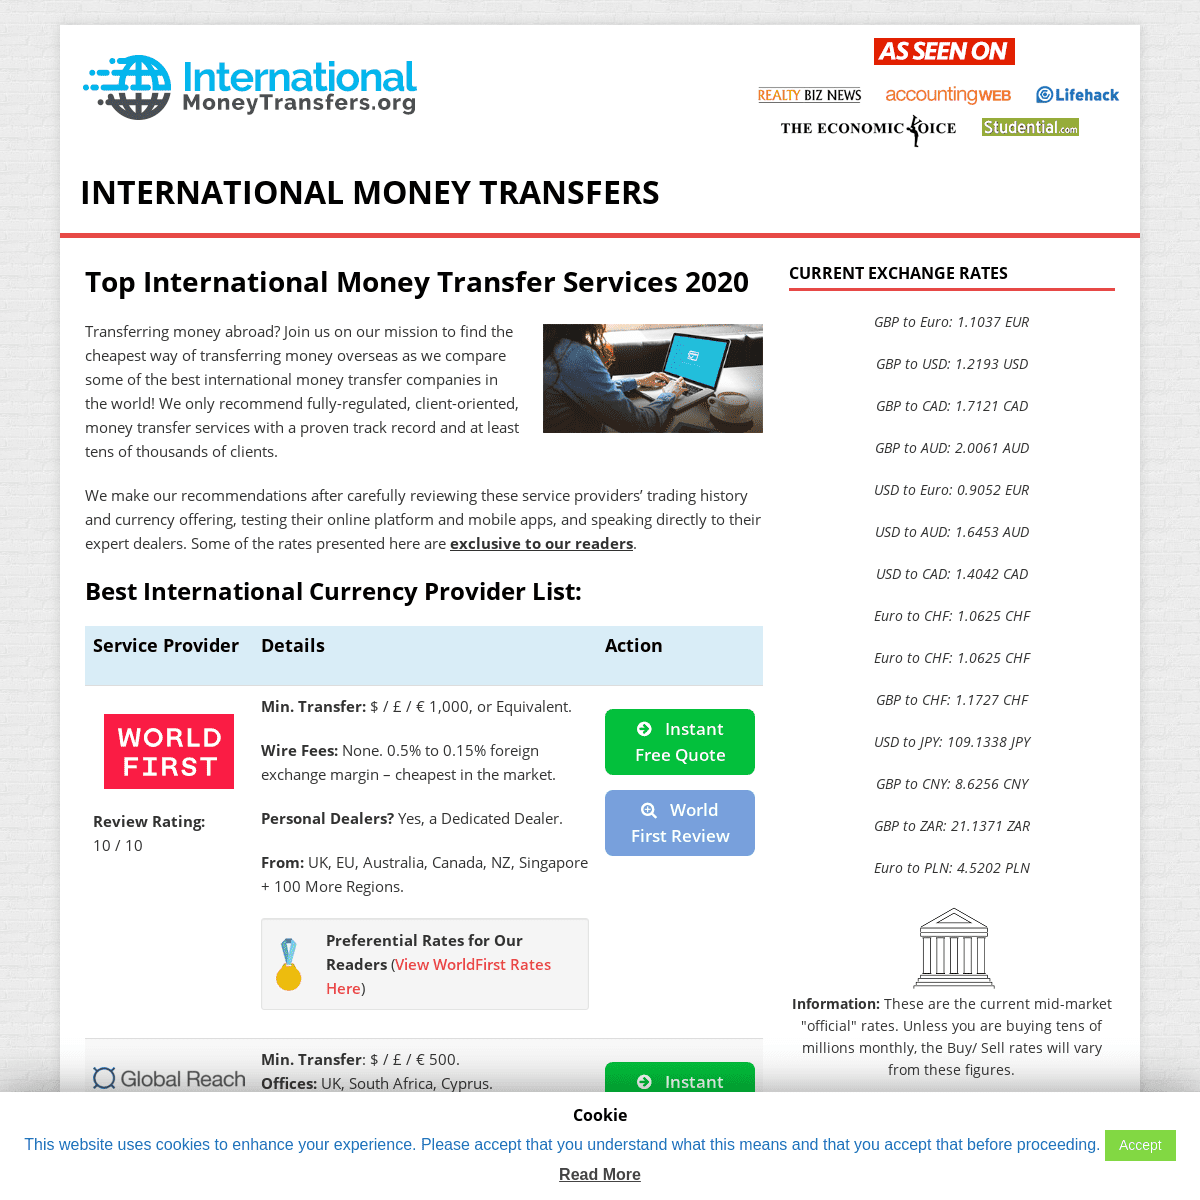 A complete backup of internationalmoneytransfers.org